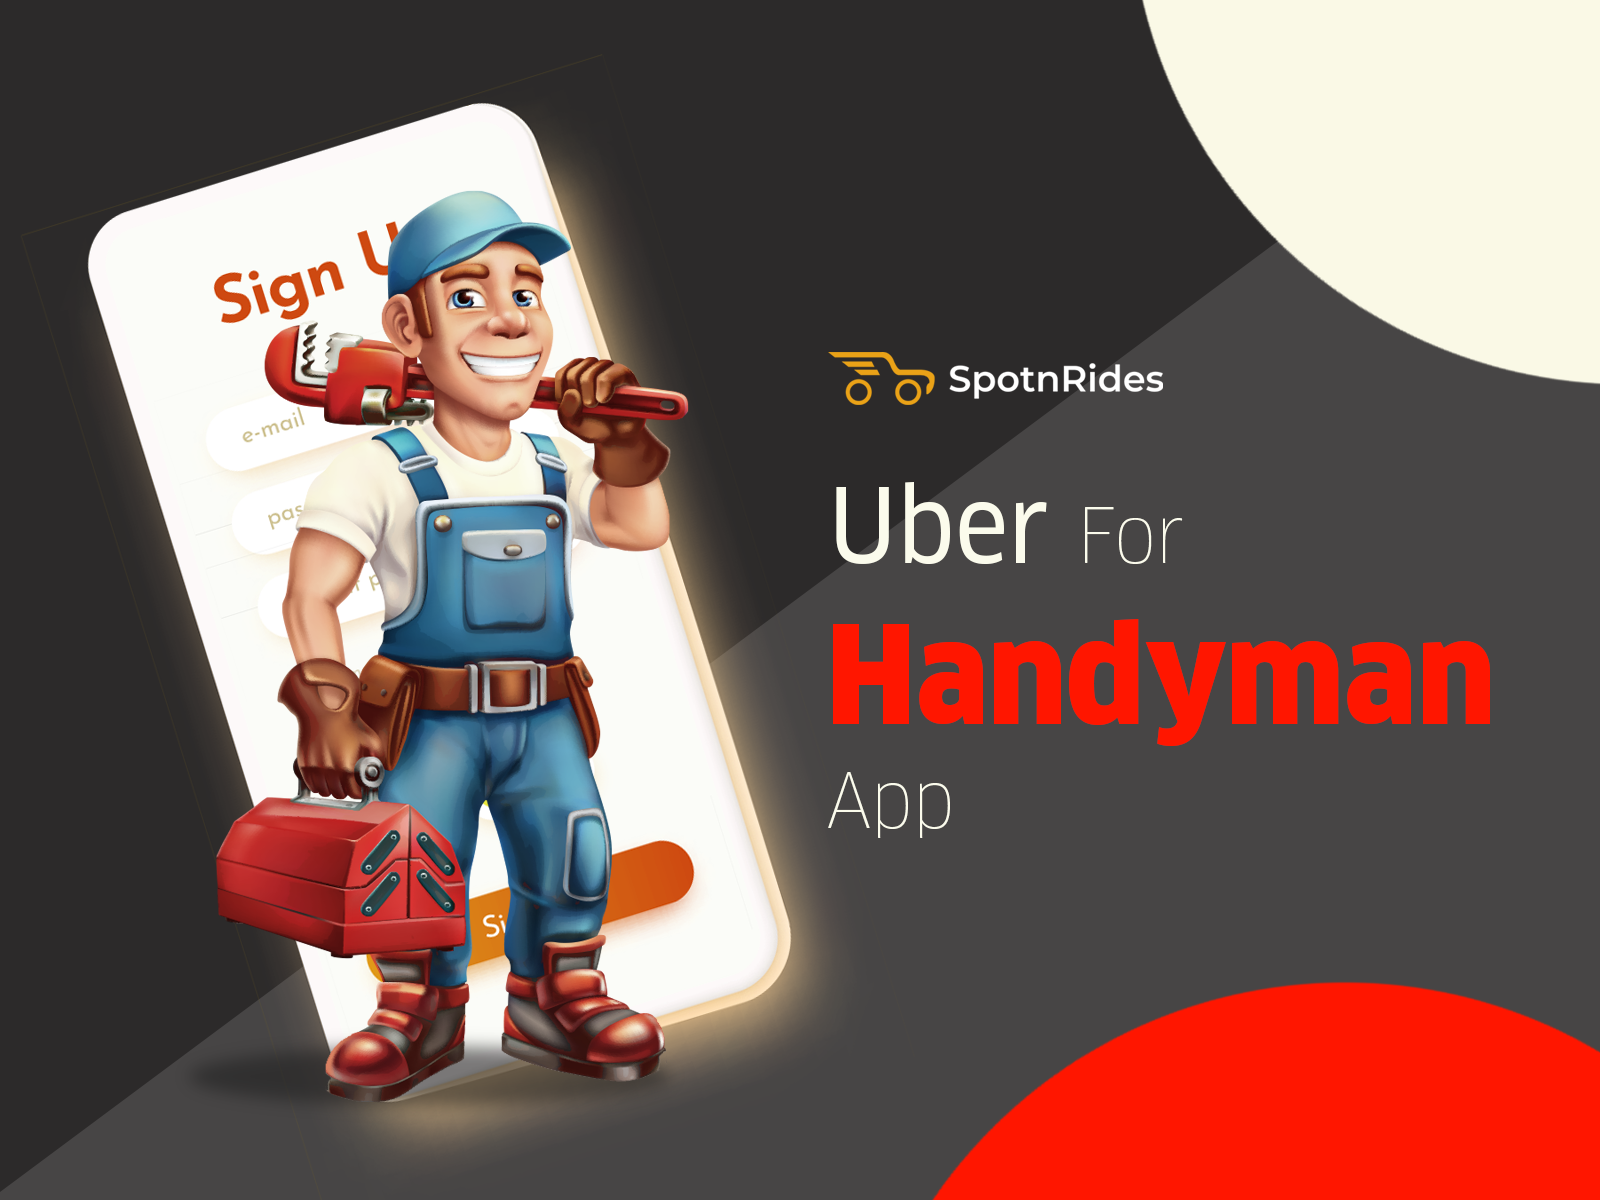 Looking for handyman service management software for your bu - Illinois - Naperville ID1526234